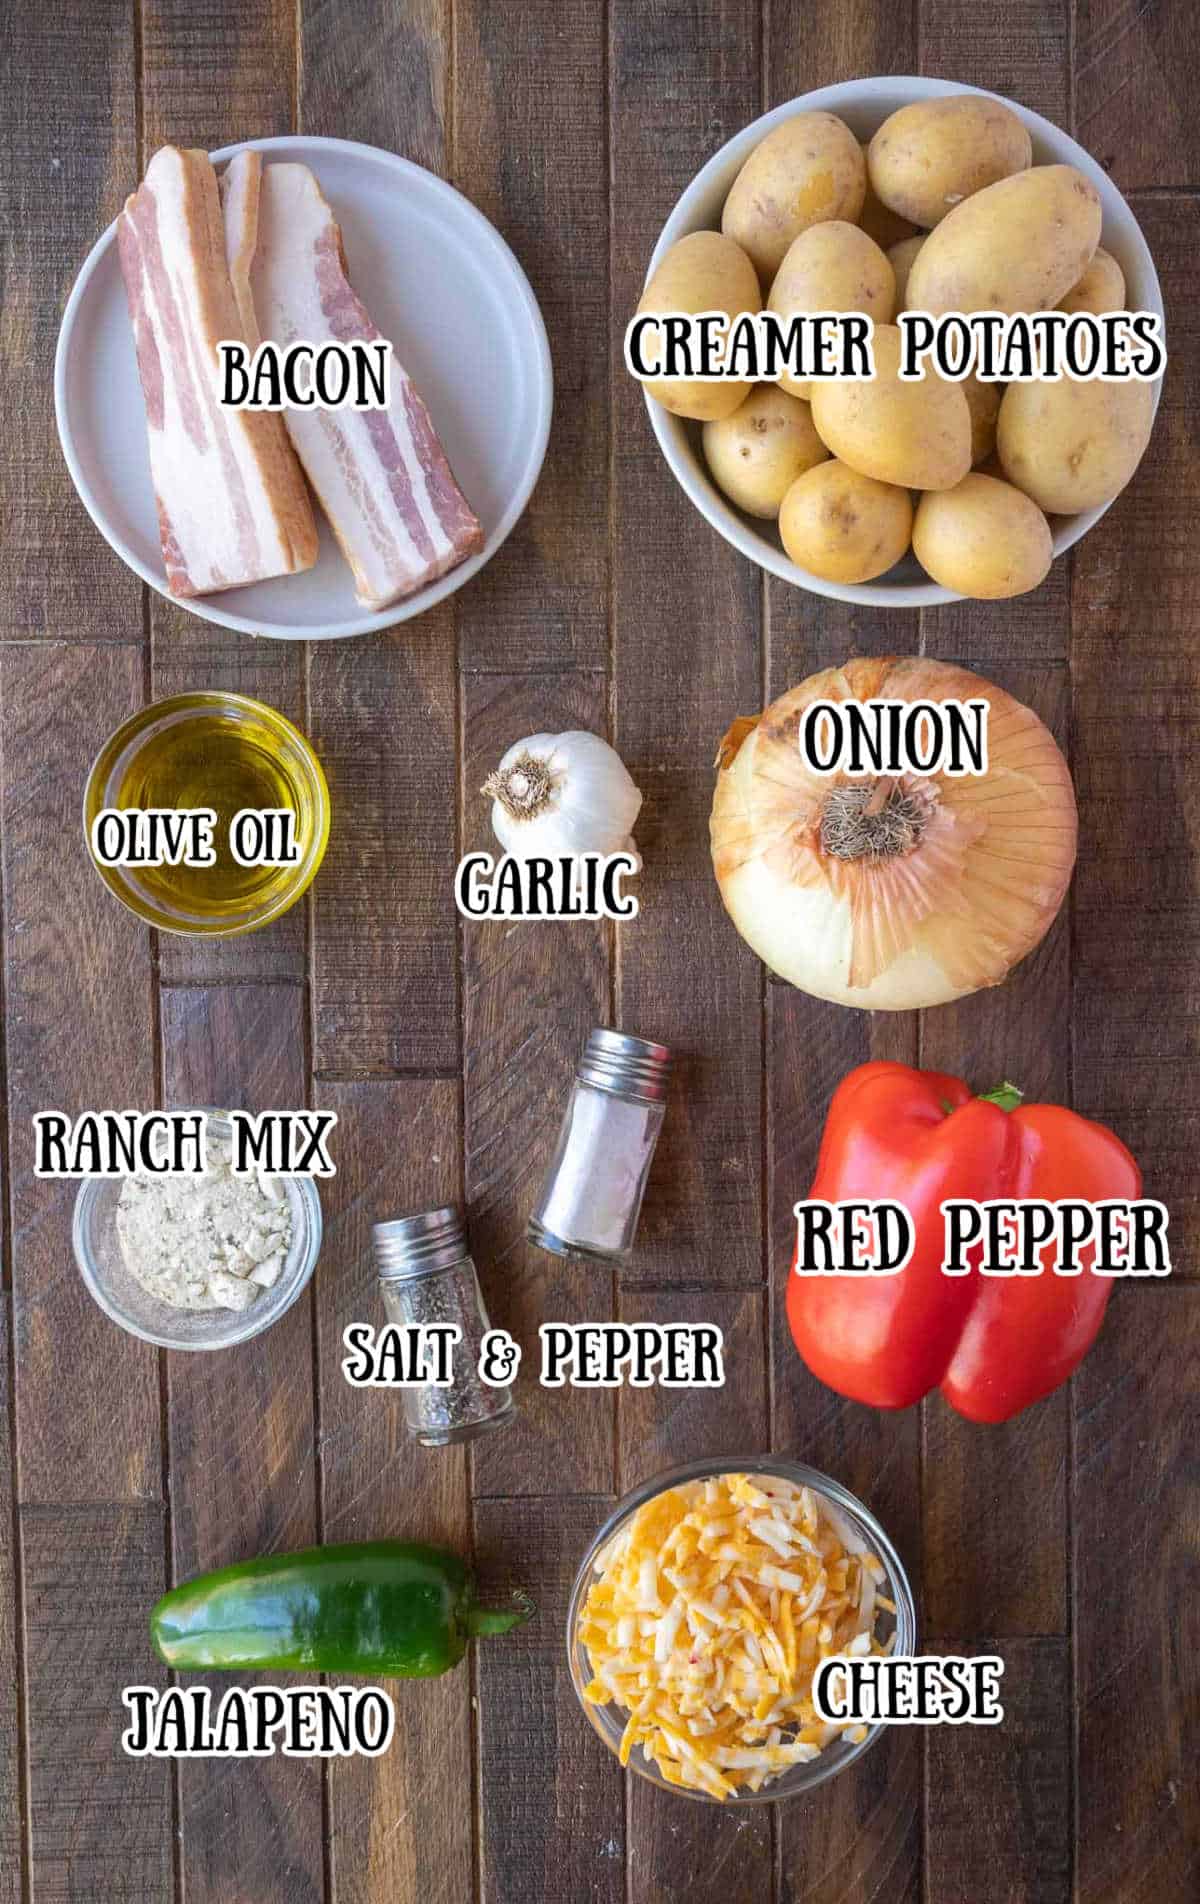 All the ingredients needed for these bacon ranch potatoes.